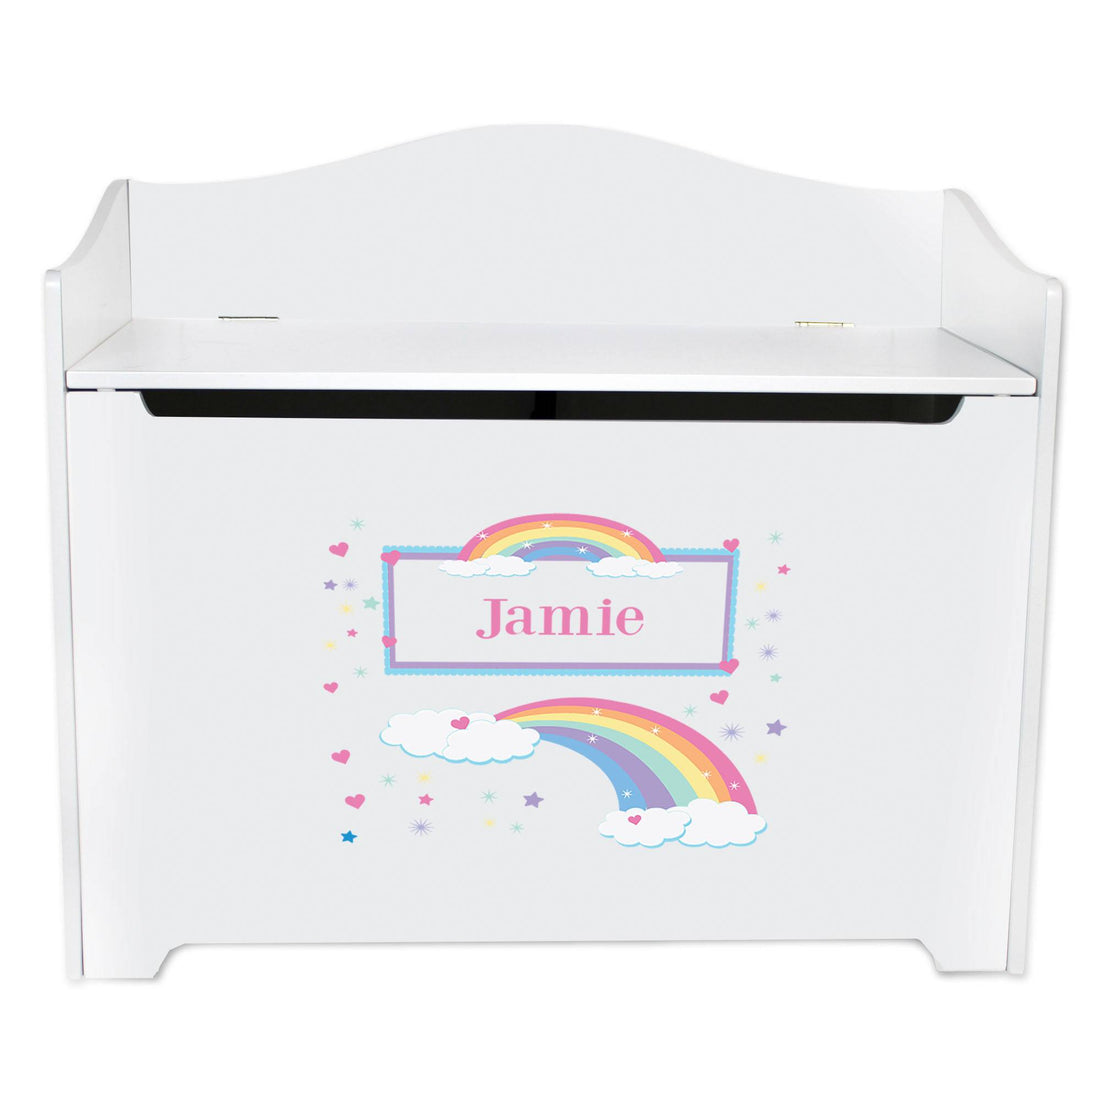 White Wooden Toy Box Bench with Rainbow Pastel design